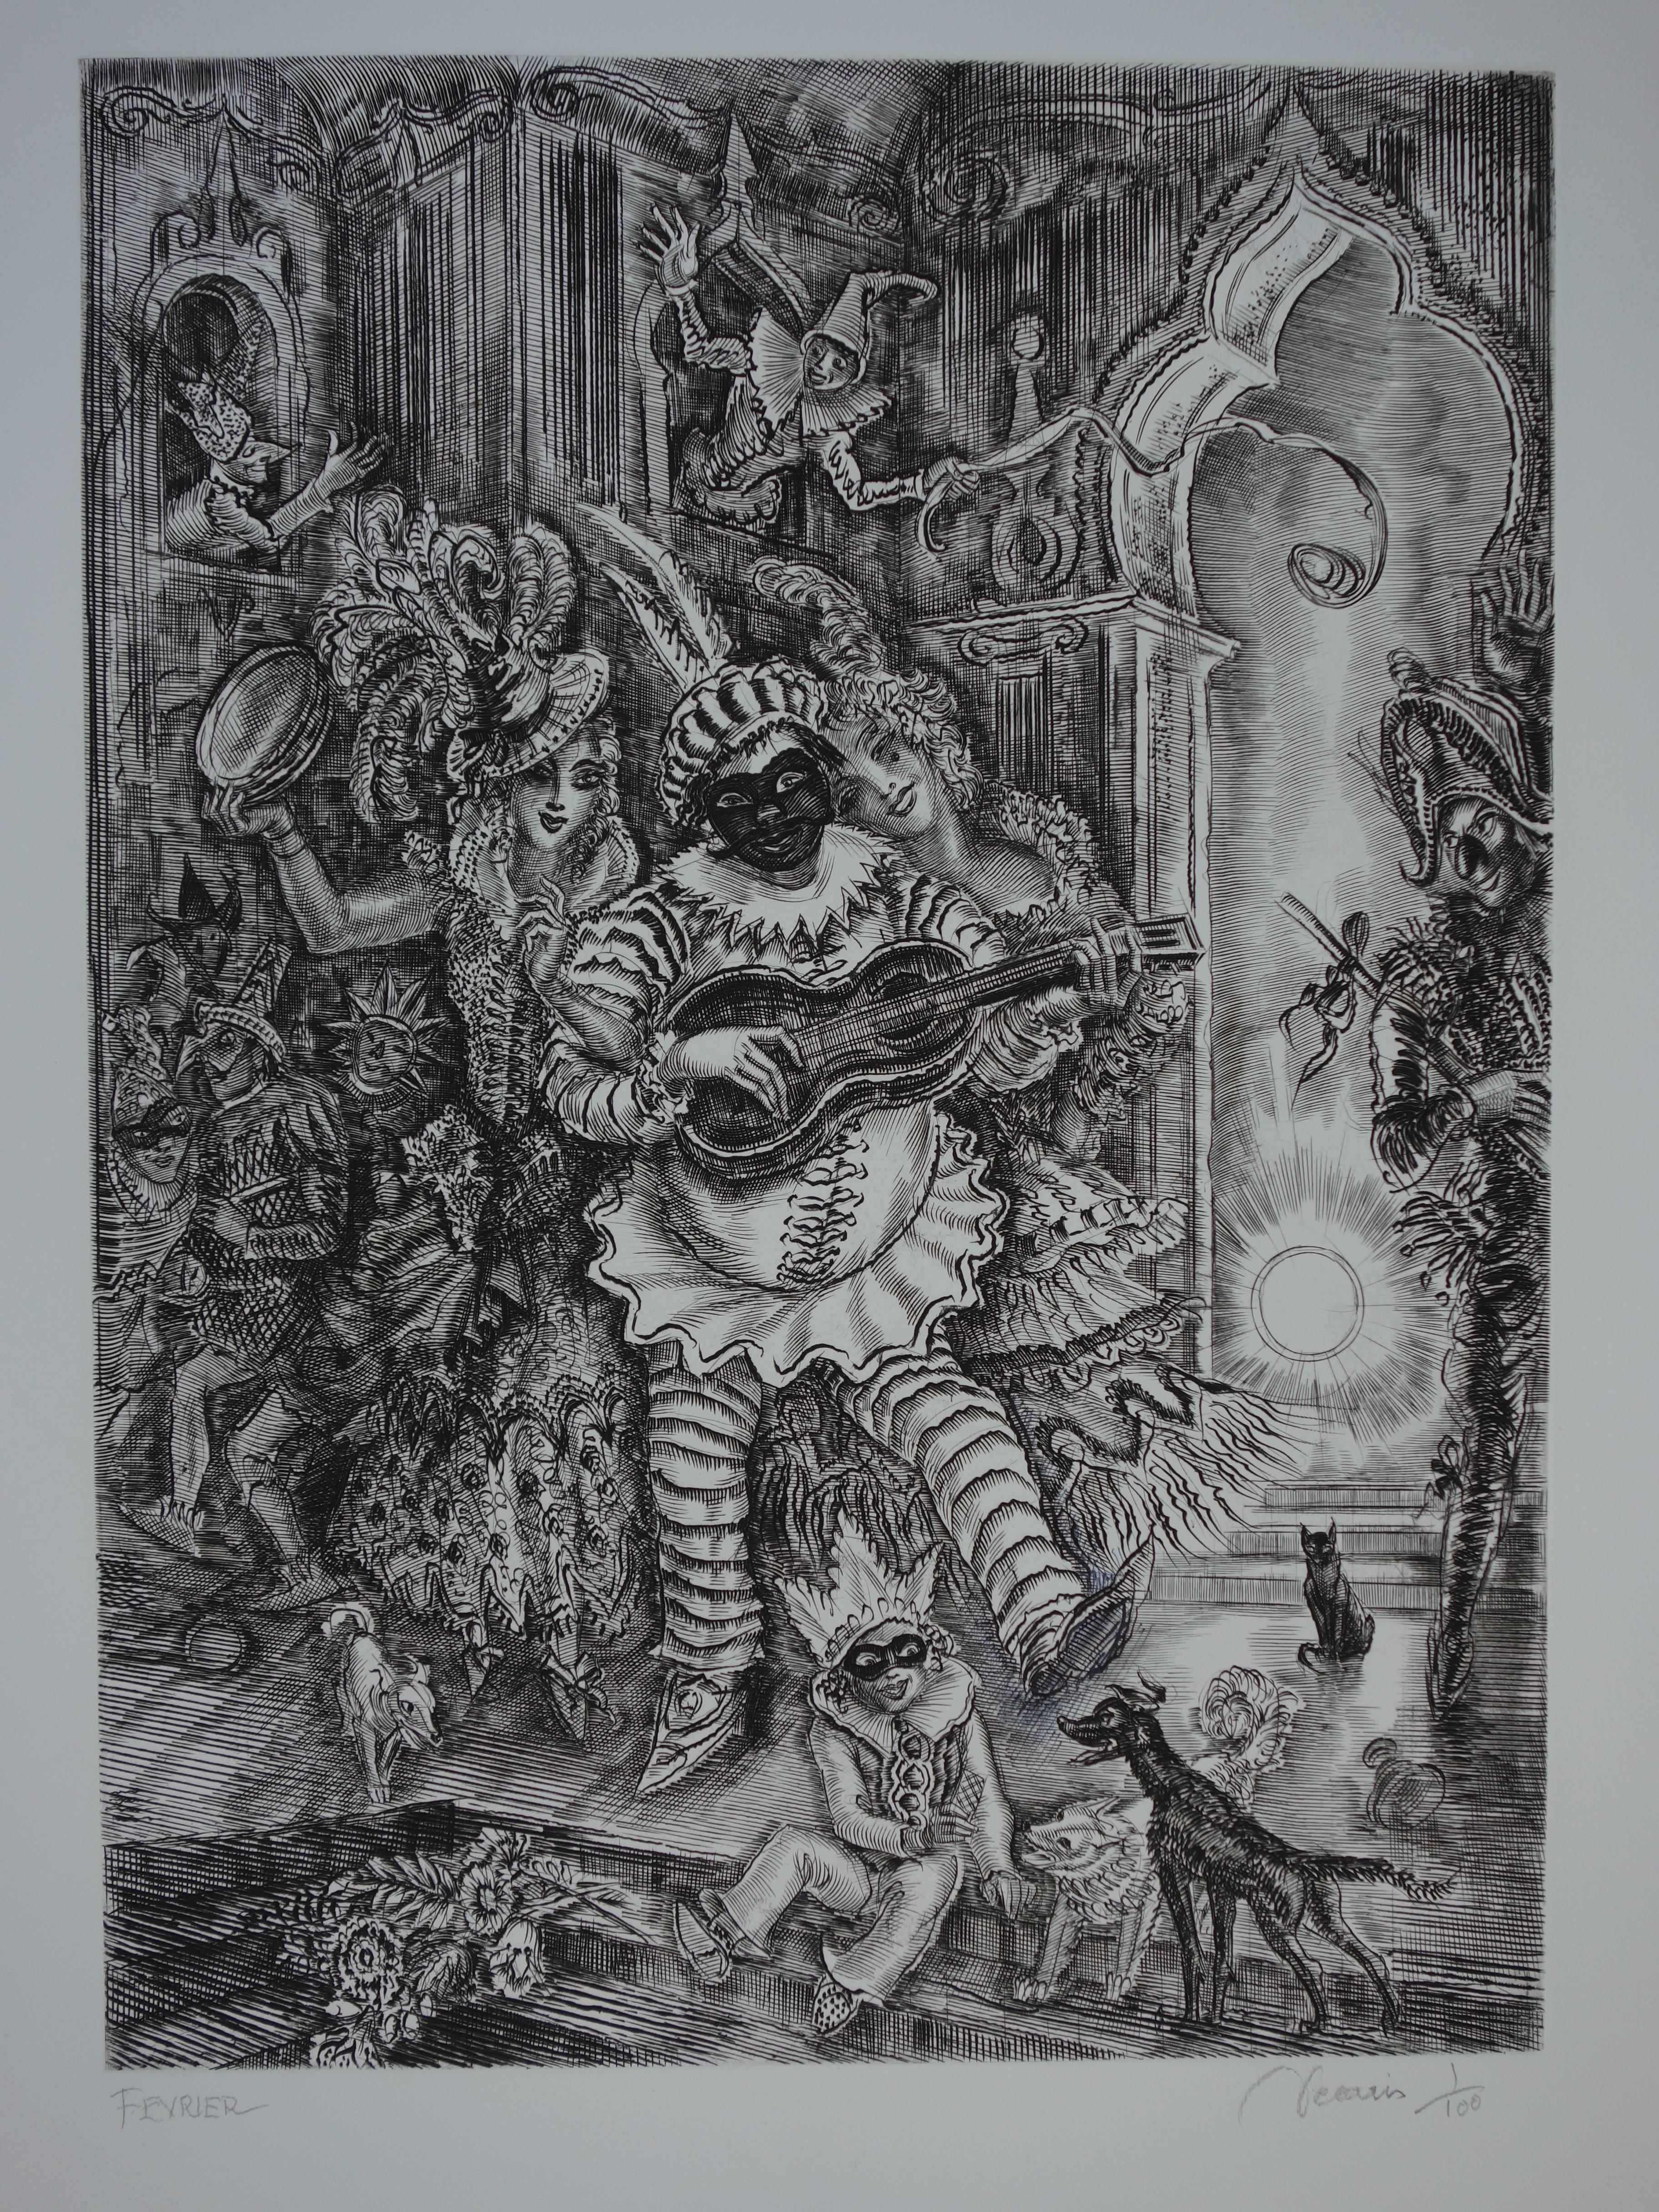 February : Carnival time - Original handsigned etching - Exceptional n° 1/100